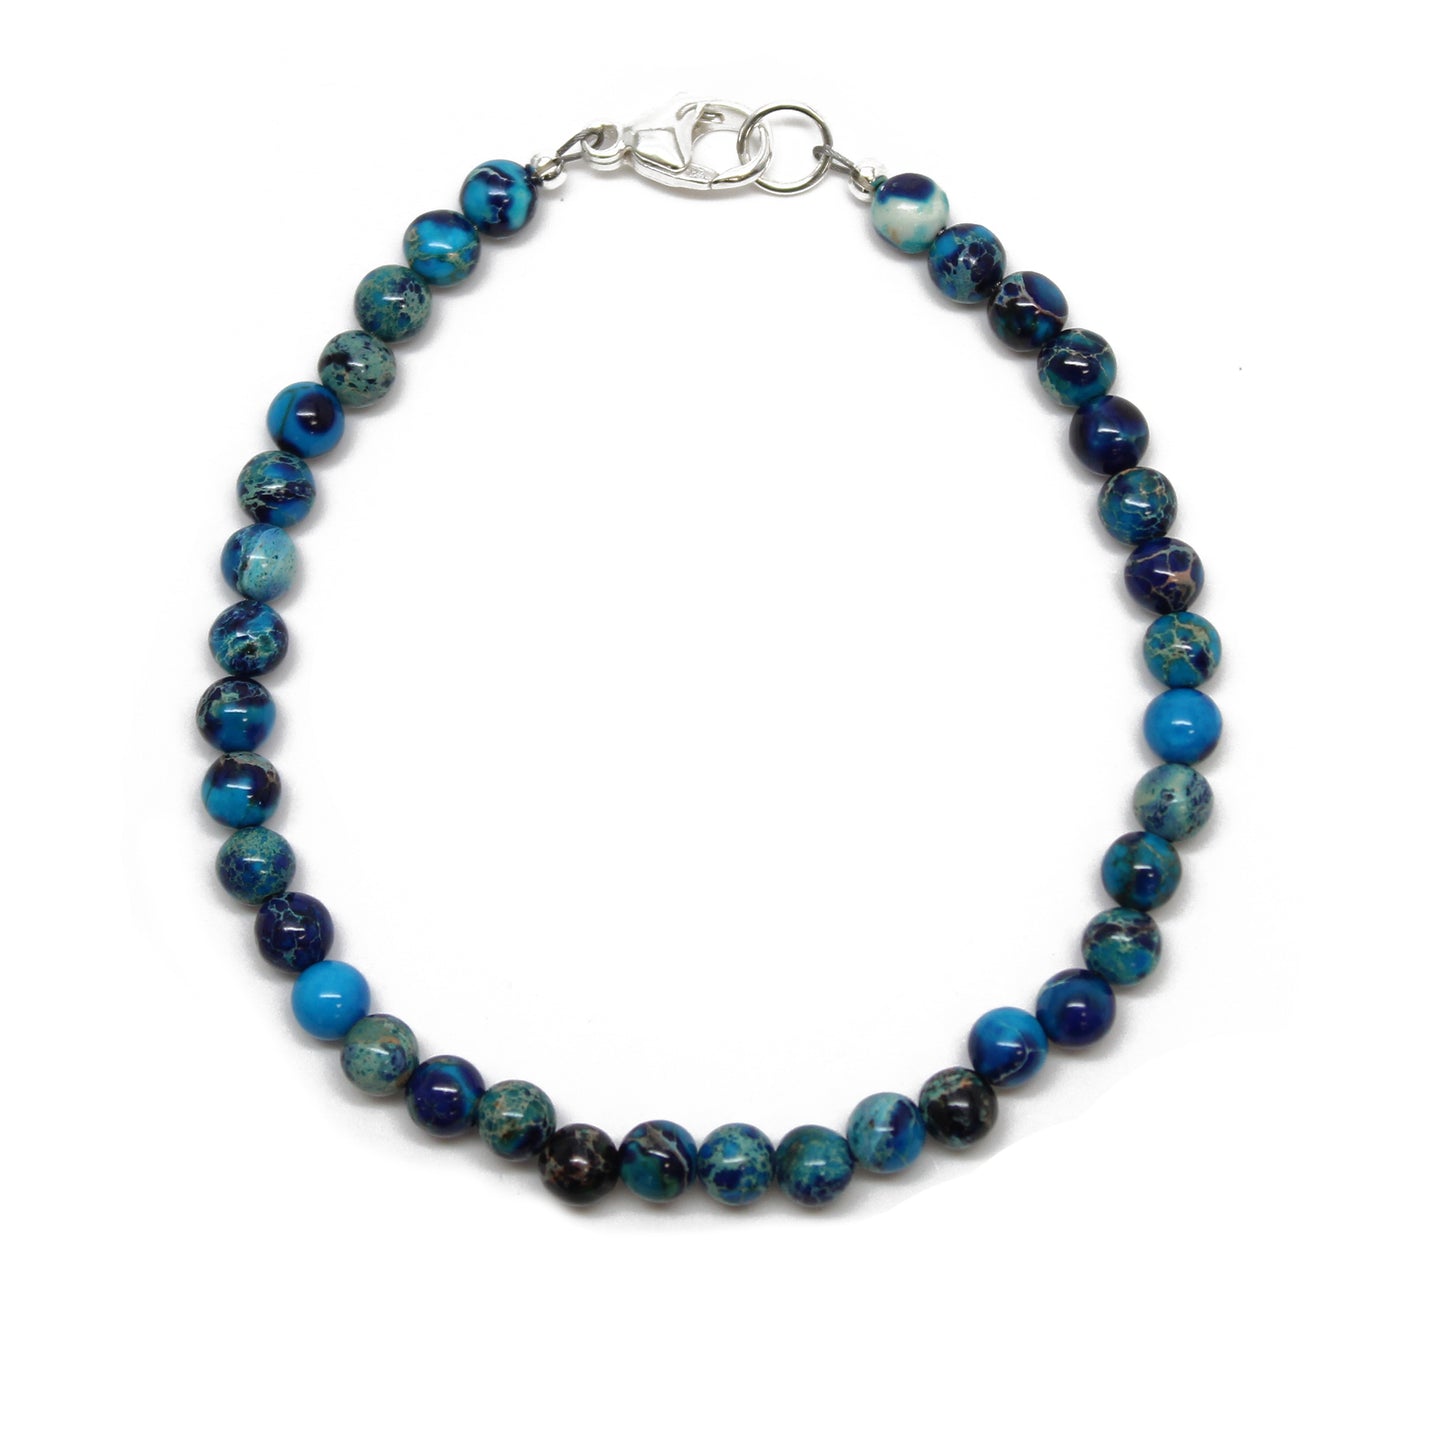 Load image into Gallery viewer, Blue Jasper Bracelet, Small 4mm Multi Color Blue Stone Bracelet with Clasp
